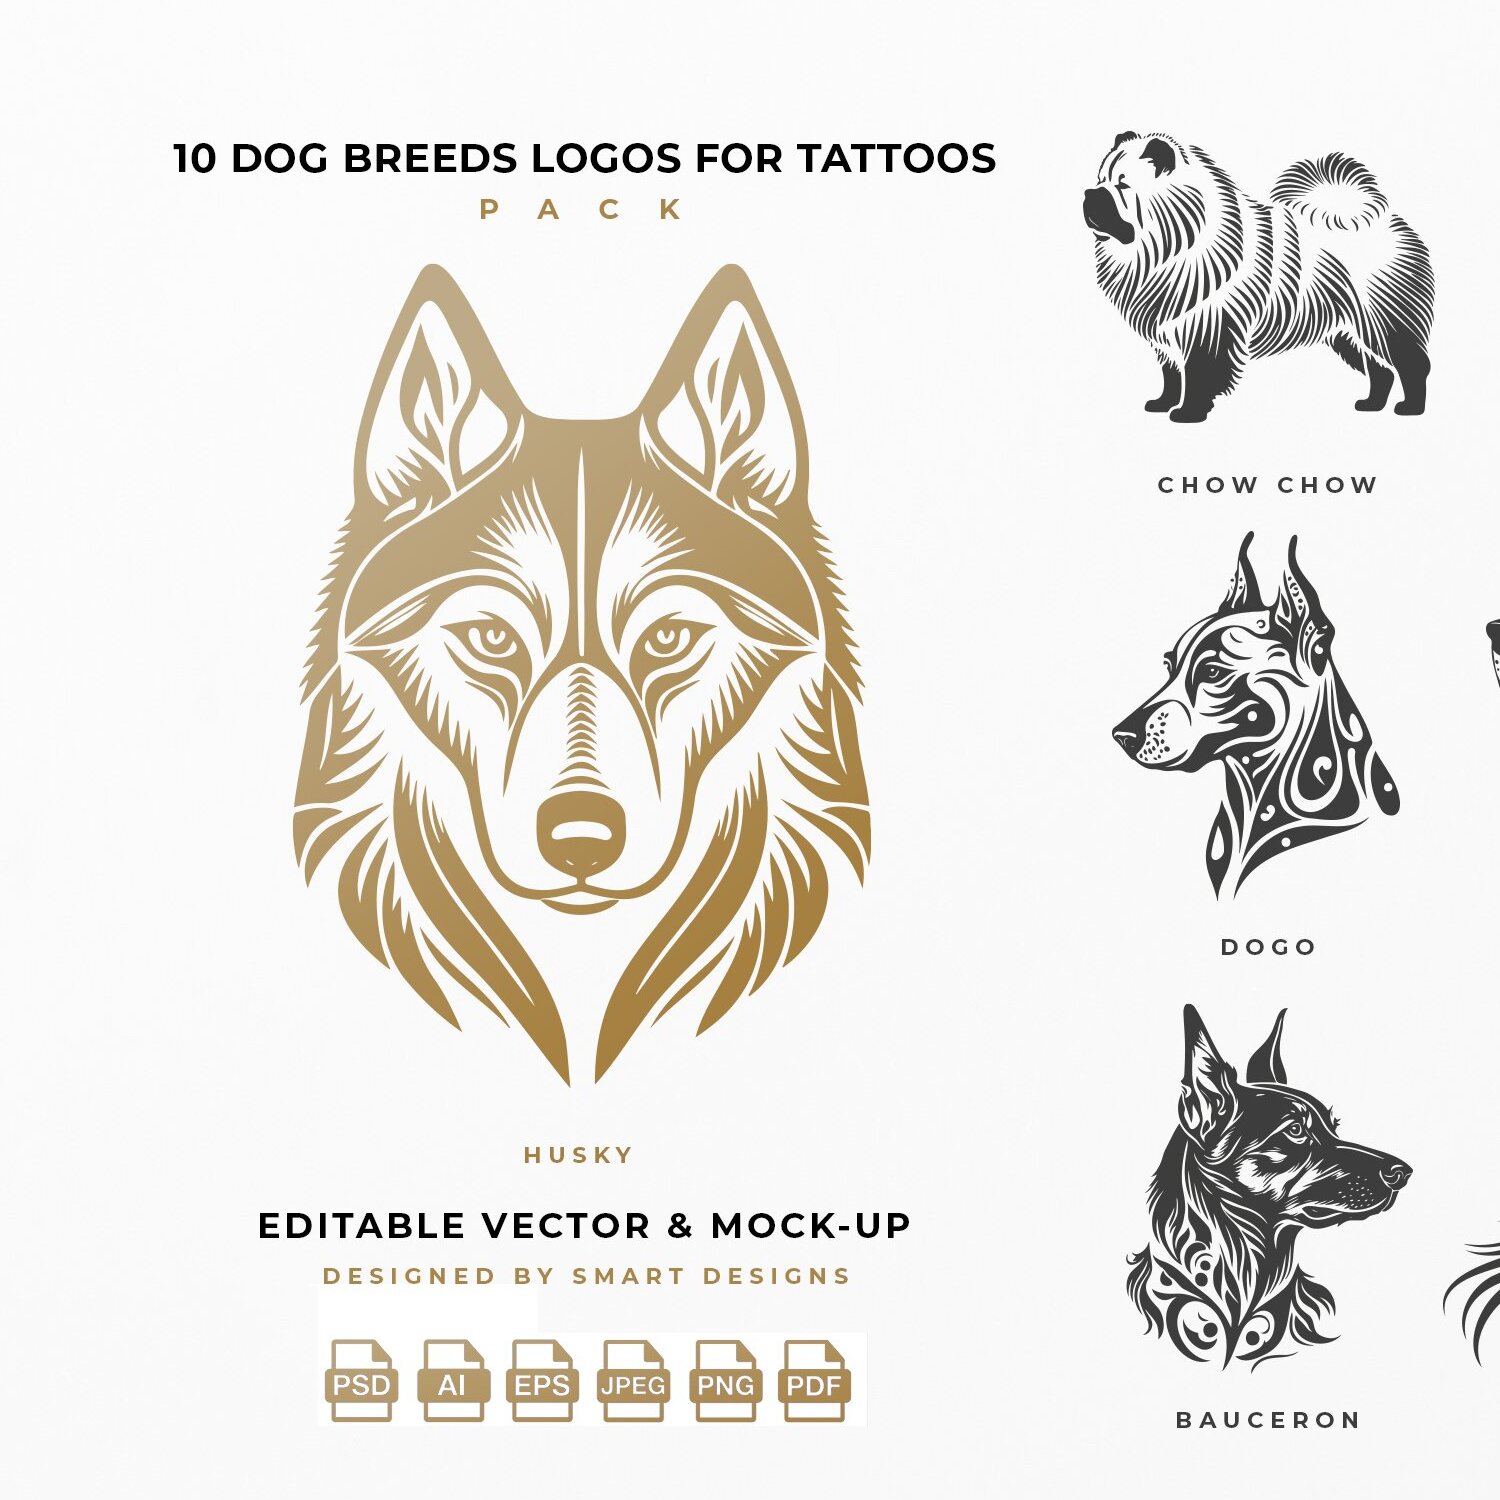 dog breeds logos for tattoos pack x10 1 119